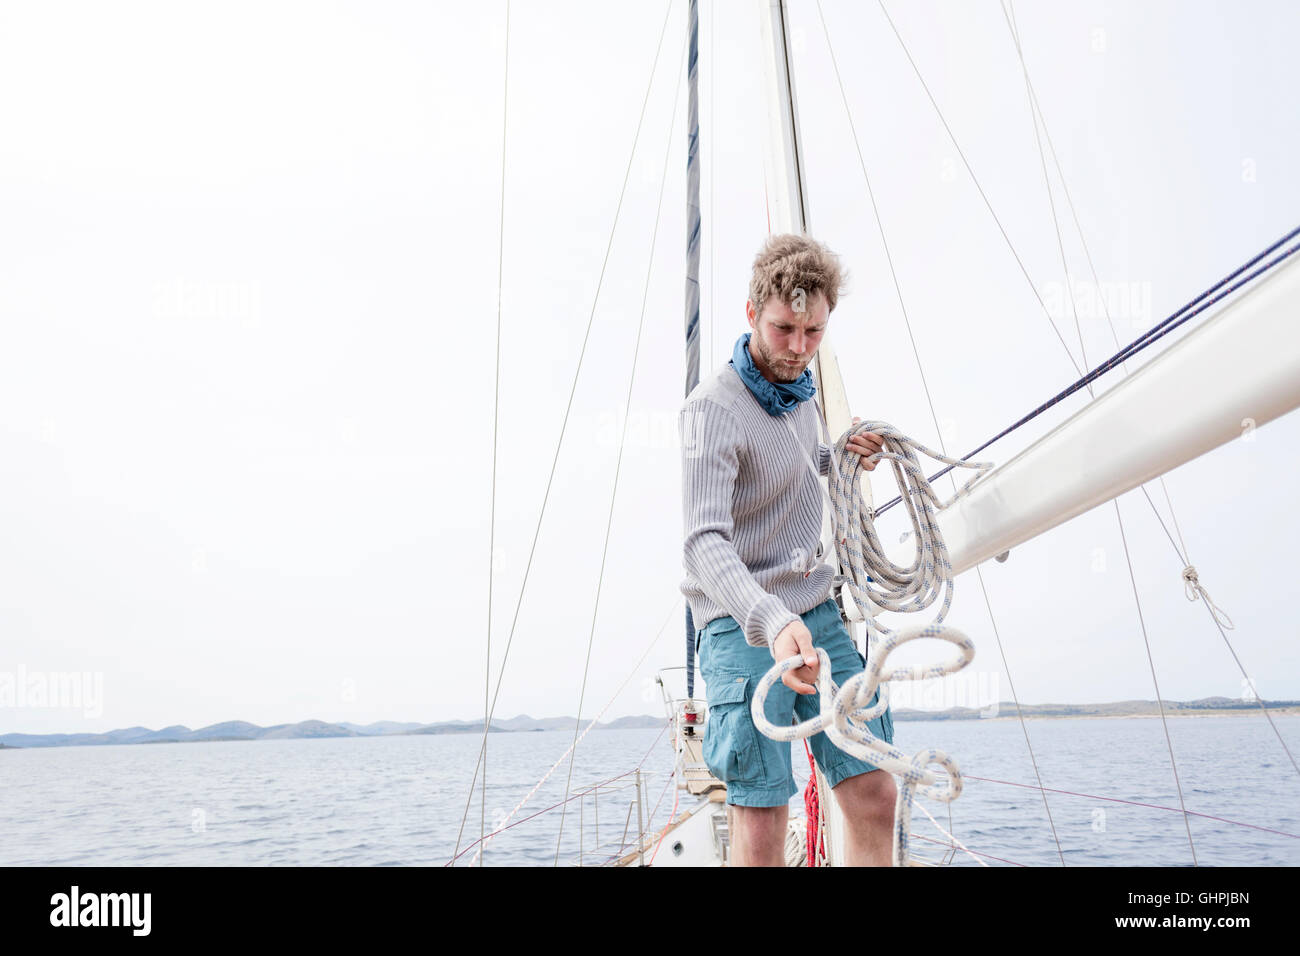 Young man on yacht curling up rope Stock Photo